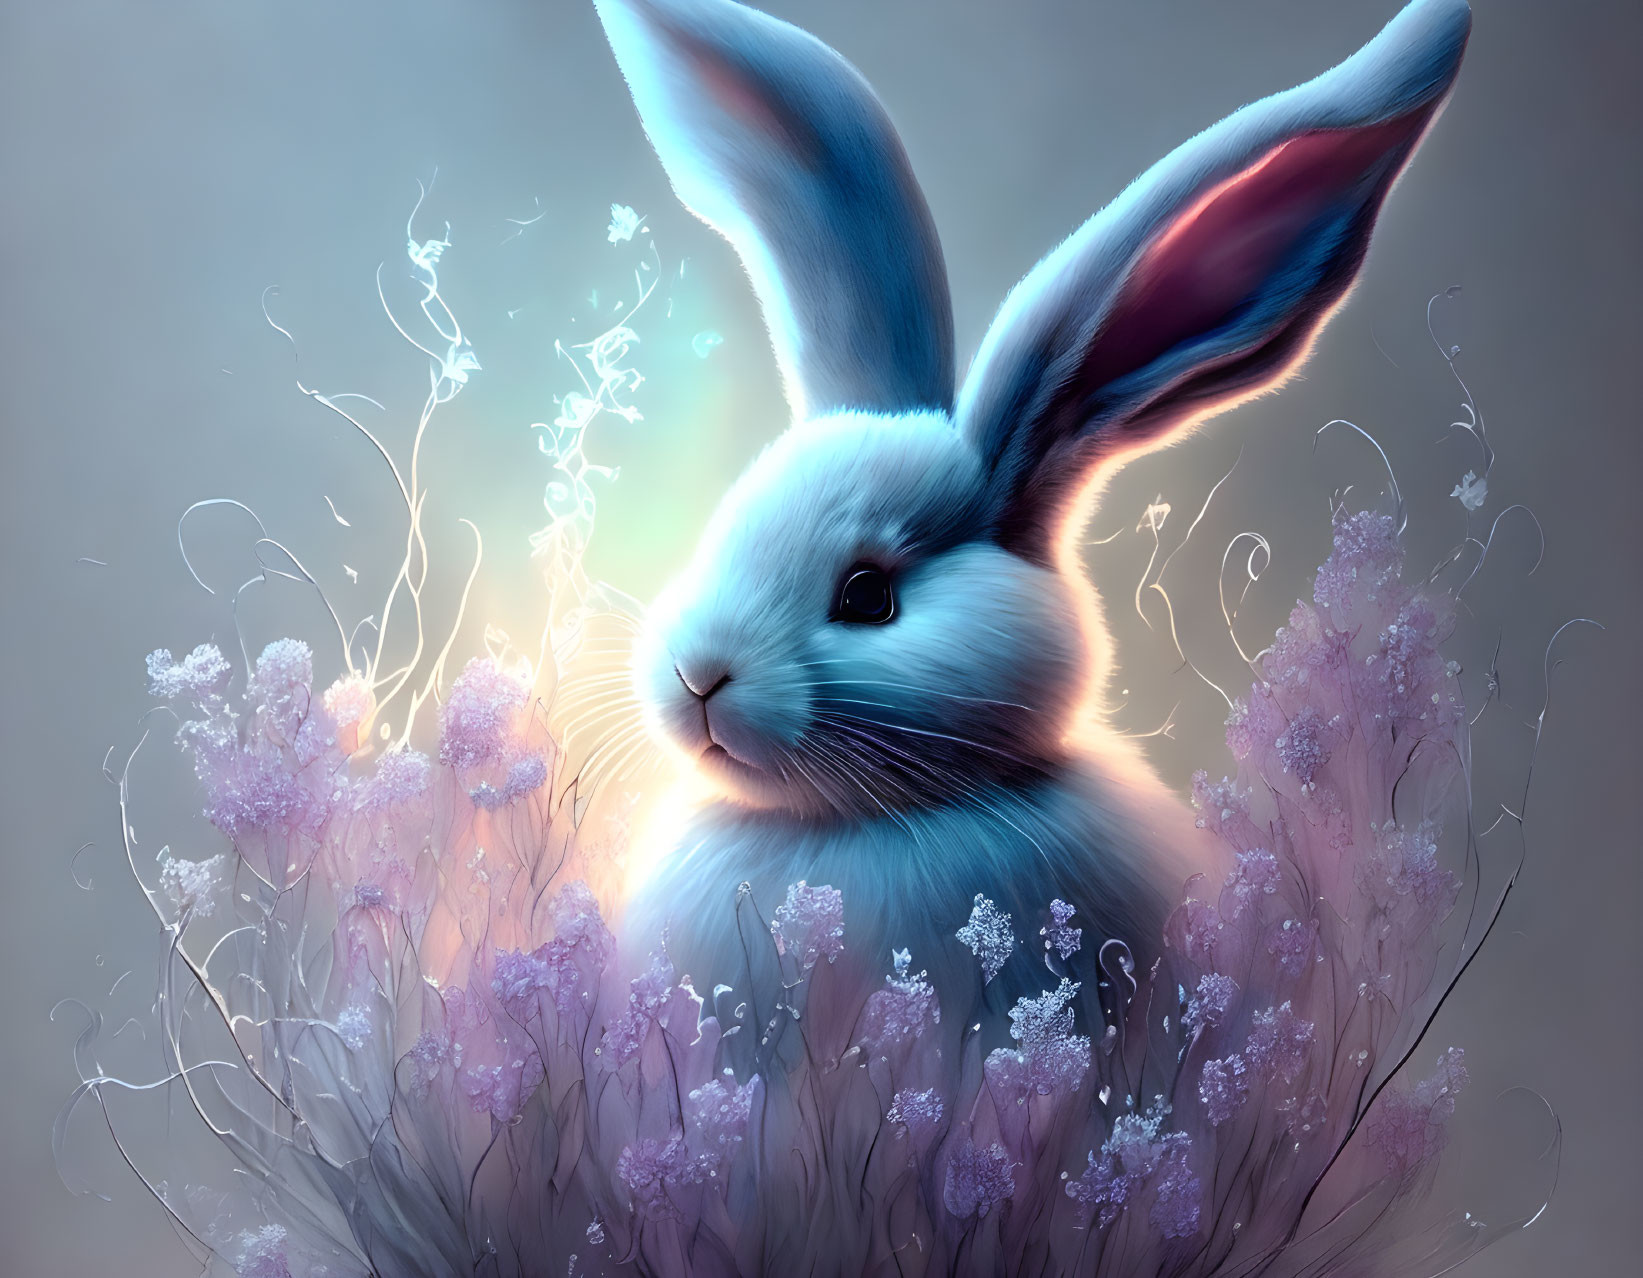 Enchanting white and blue rabbit in a magical field